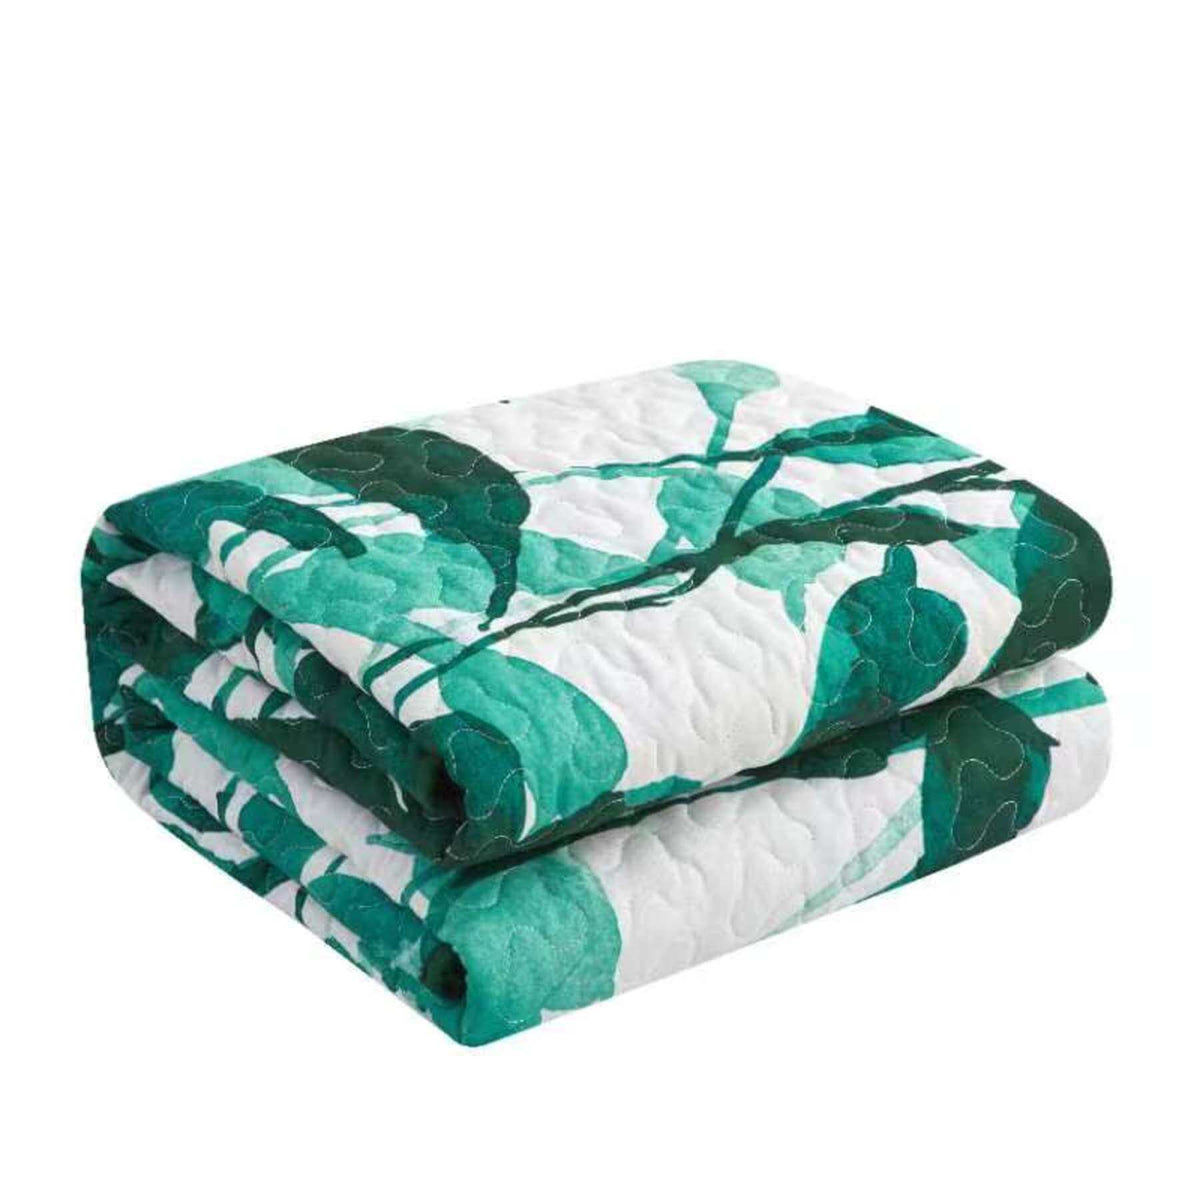 Chic Home Avery 7 Piece Watercolor Floral Quilt Set Green